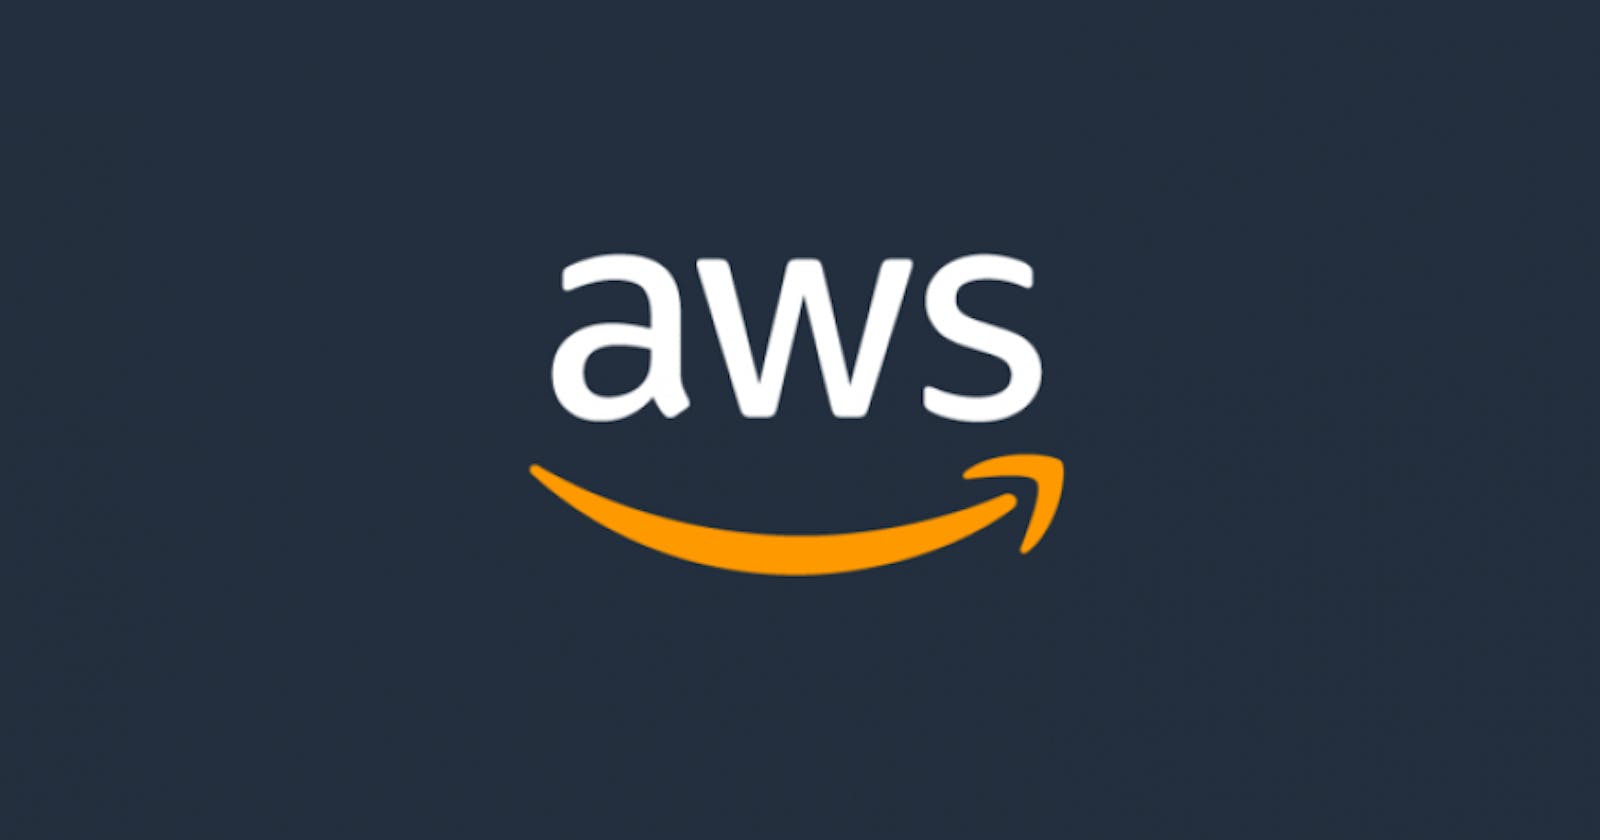 What I did to enable CORS on AWS API Gateway